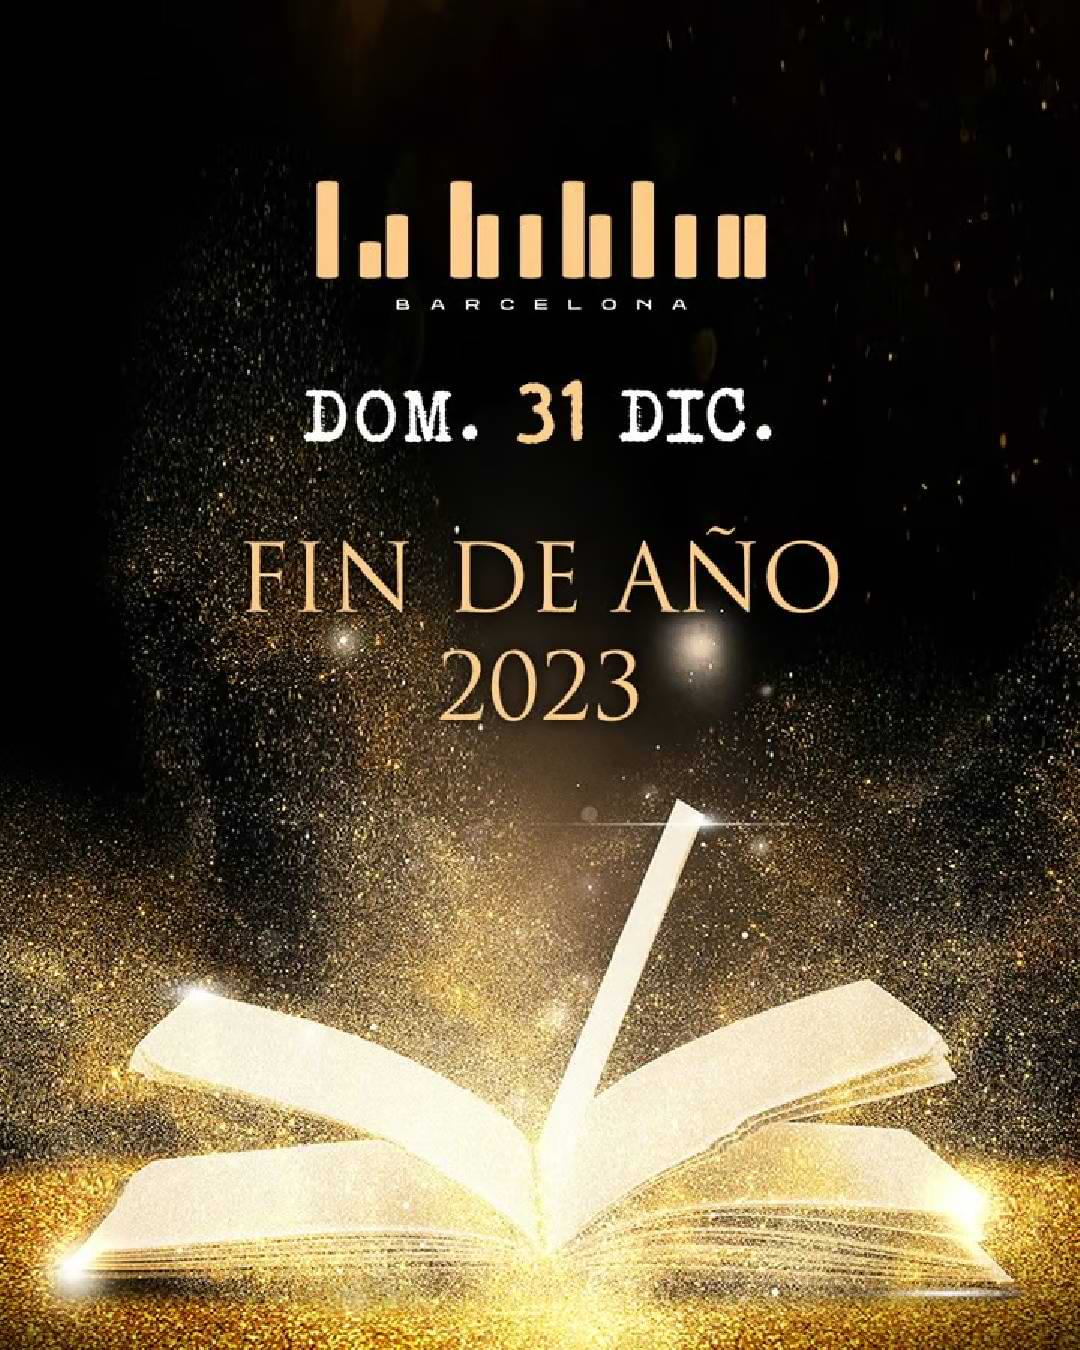 the Barcelona biblio end of the year